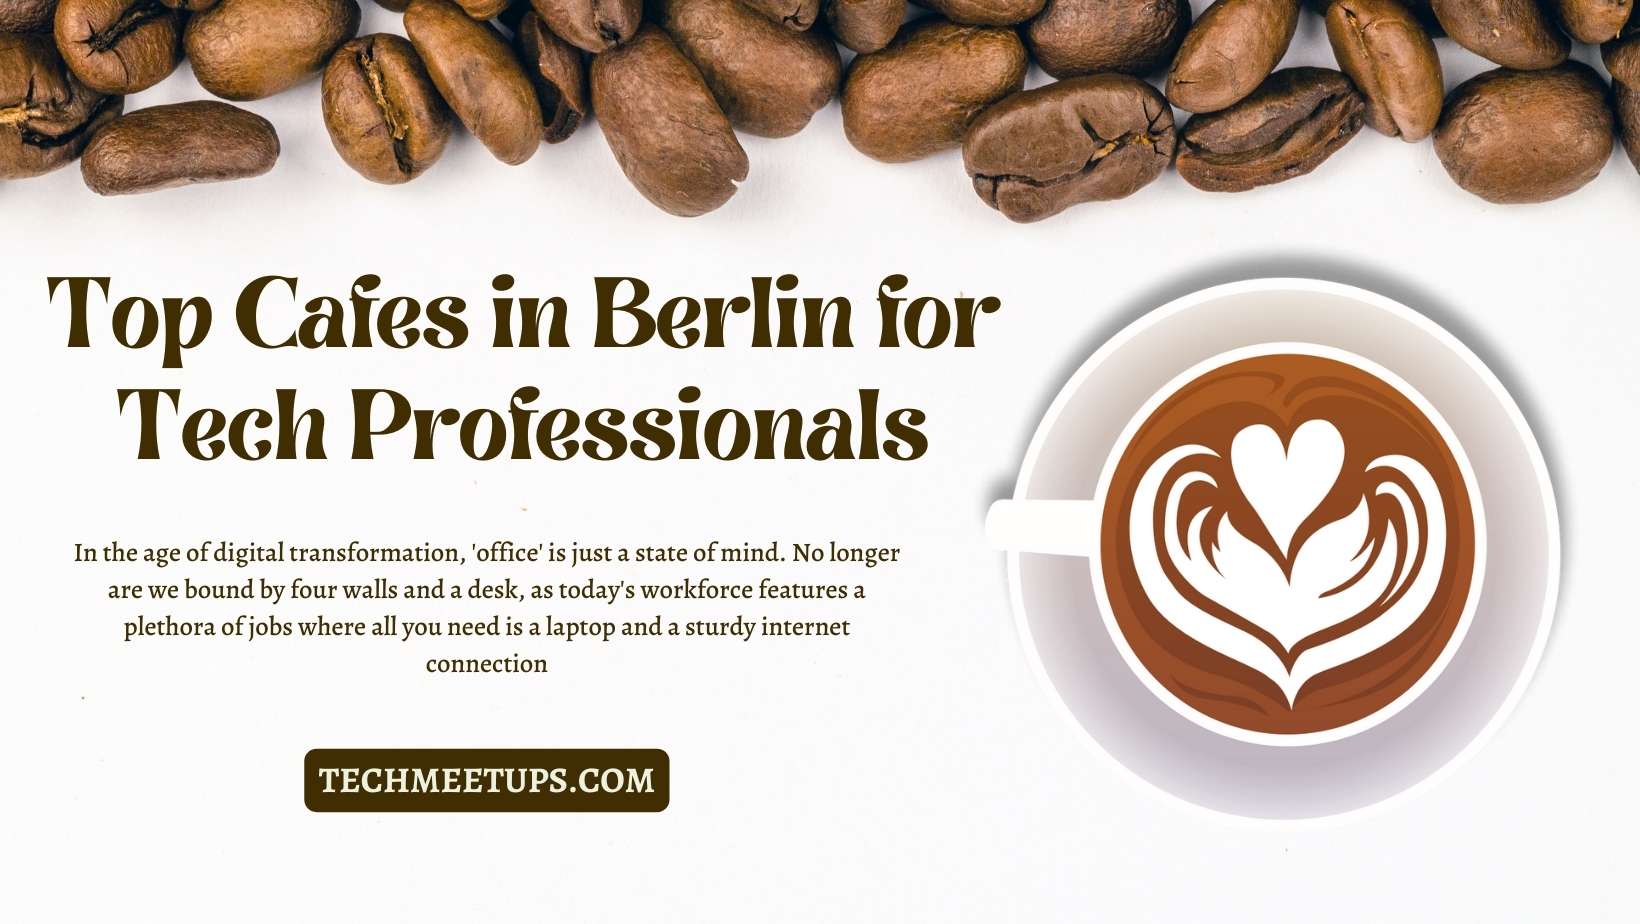 Top Cafes in Berlin for Tech Professionals